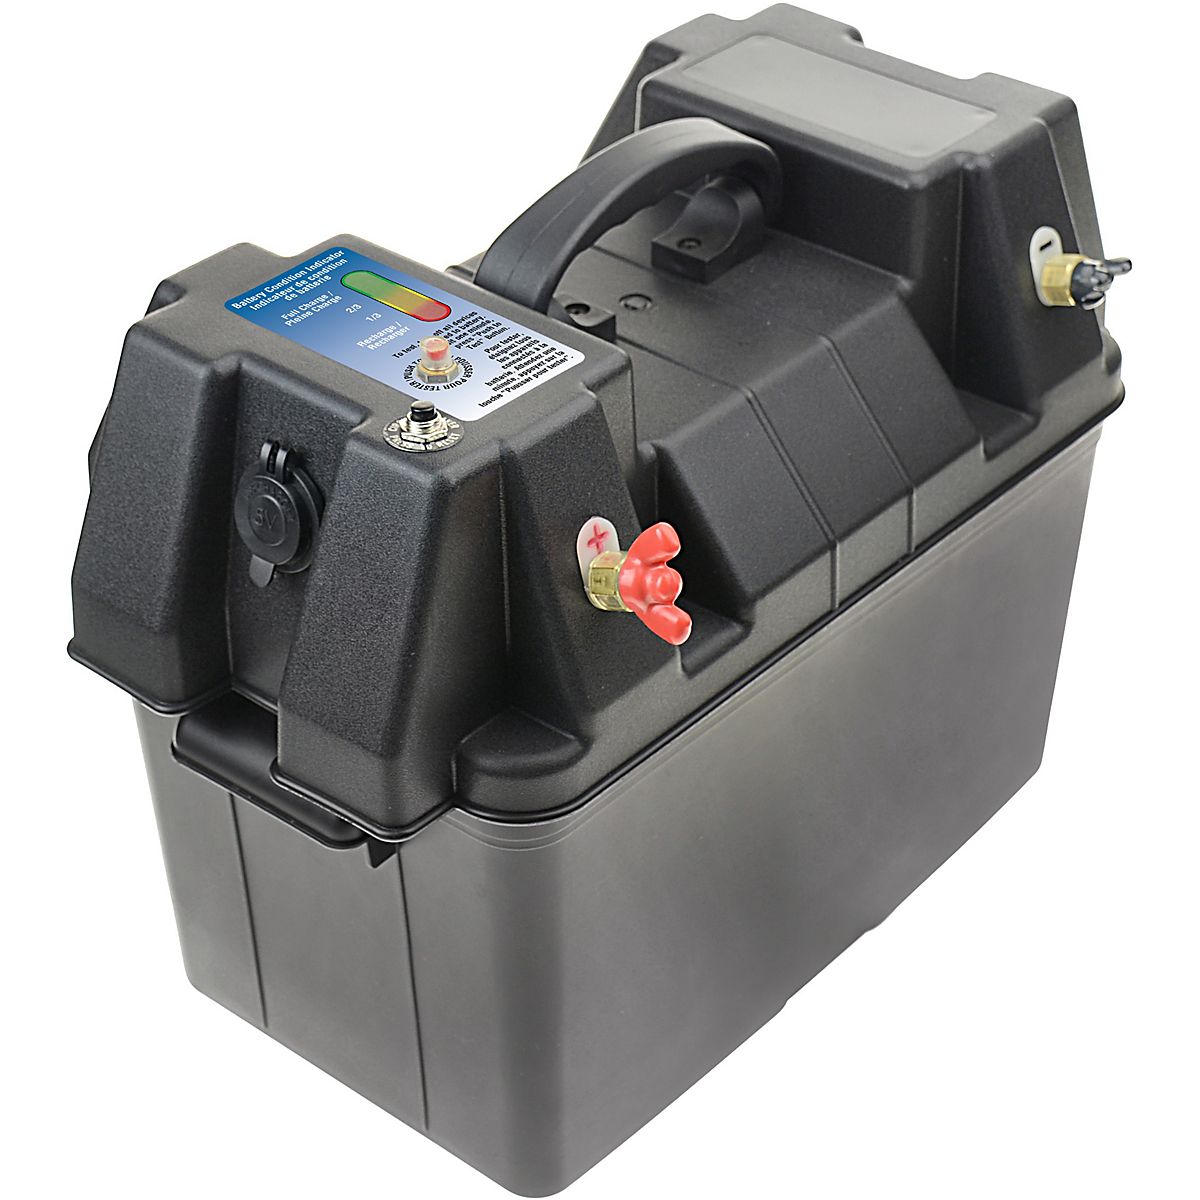 Marine Raider Battery Box Station with Handle and USB Power | Academy